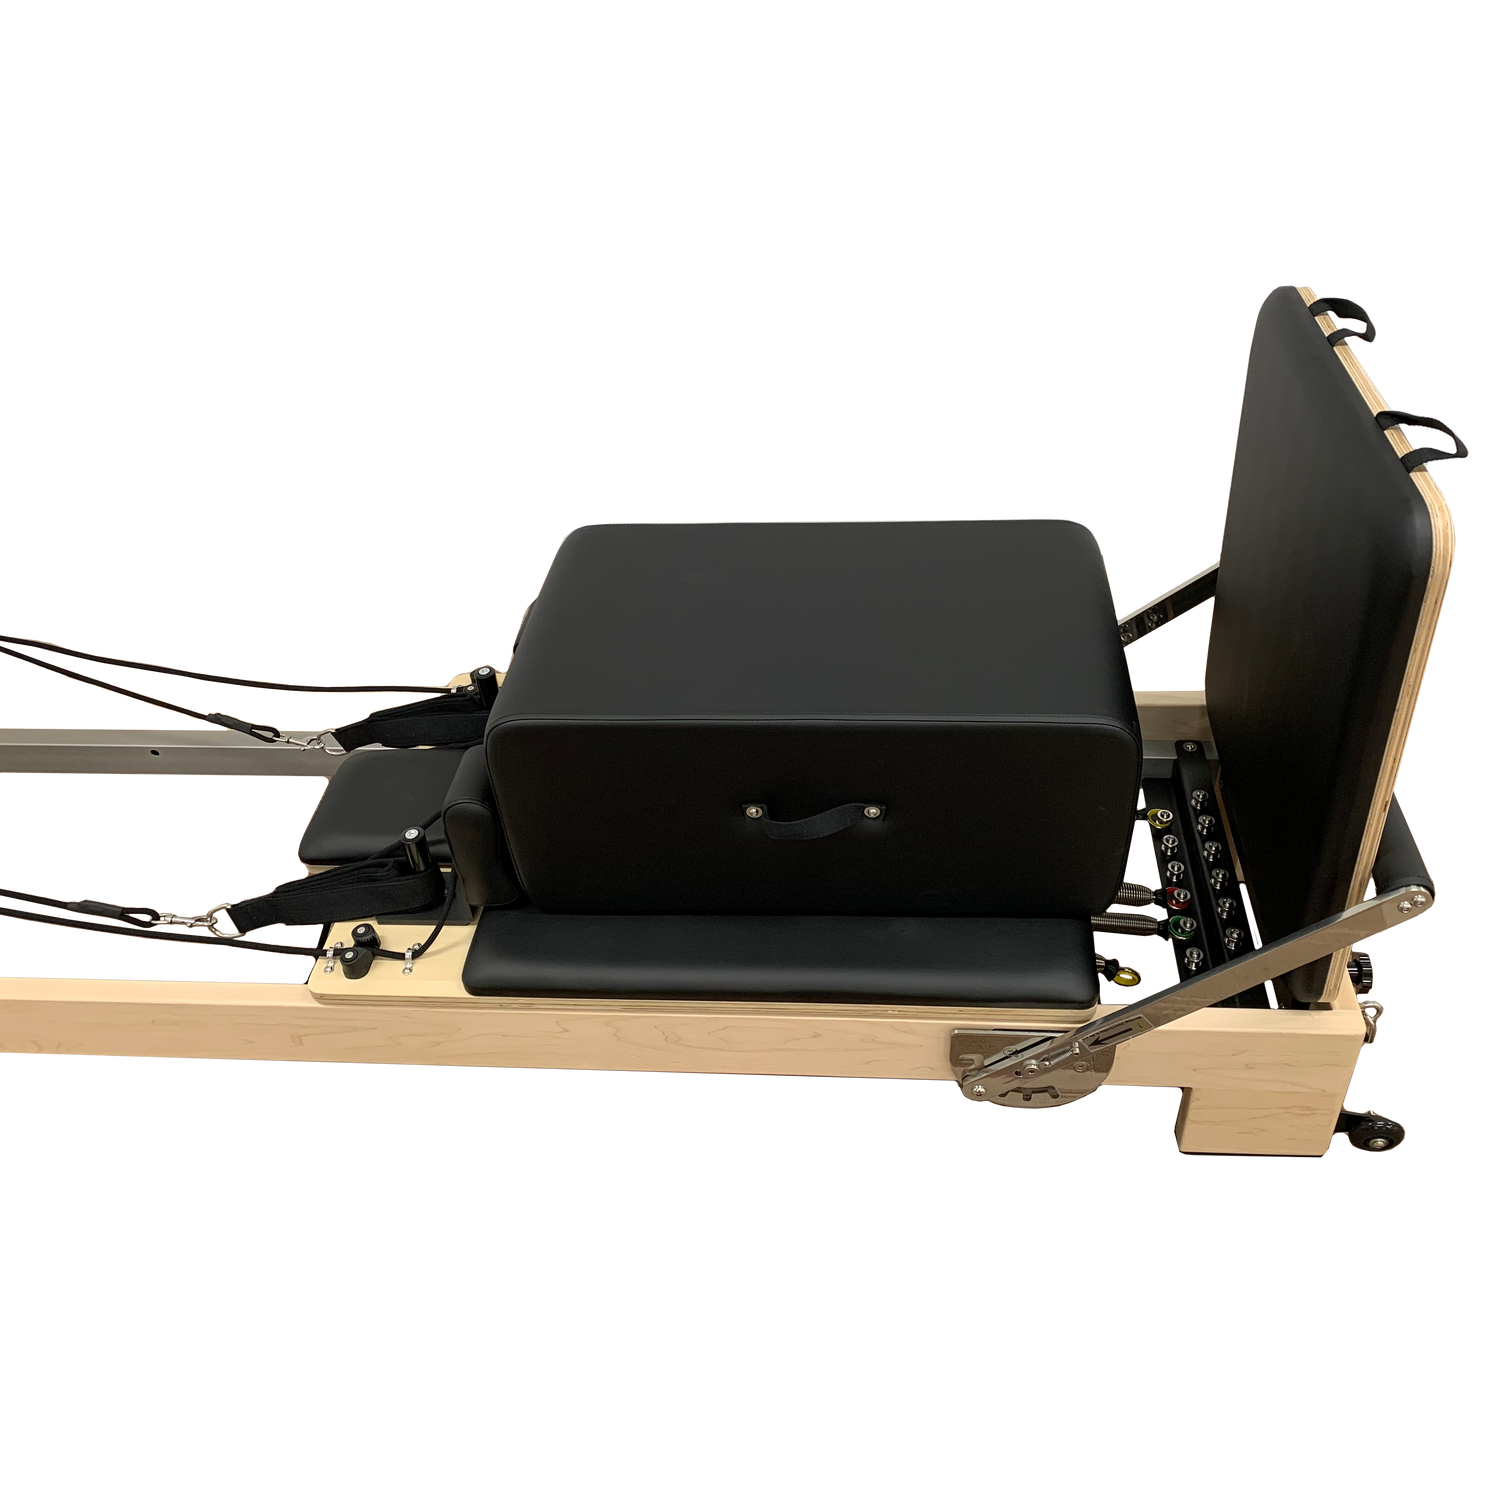 PP-06 Foldable Reformer // PAYMENT PLAN - from only $47 per week